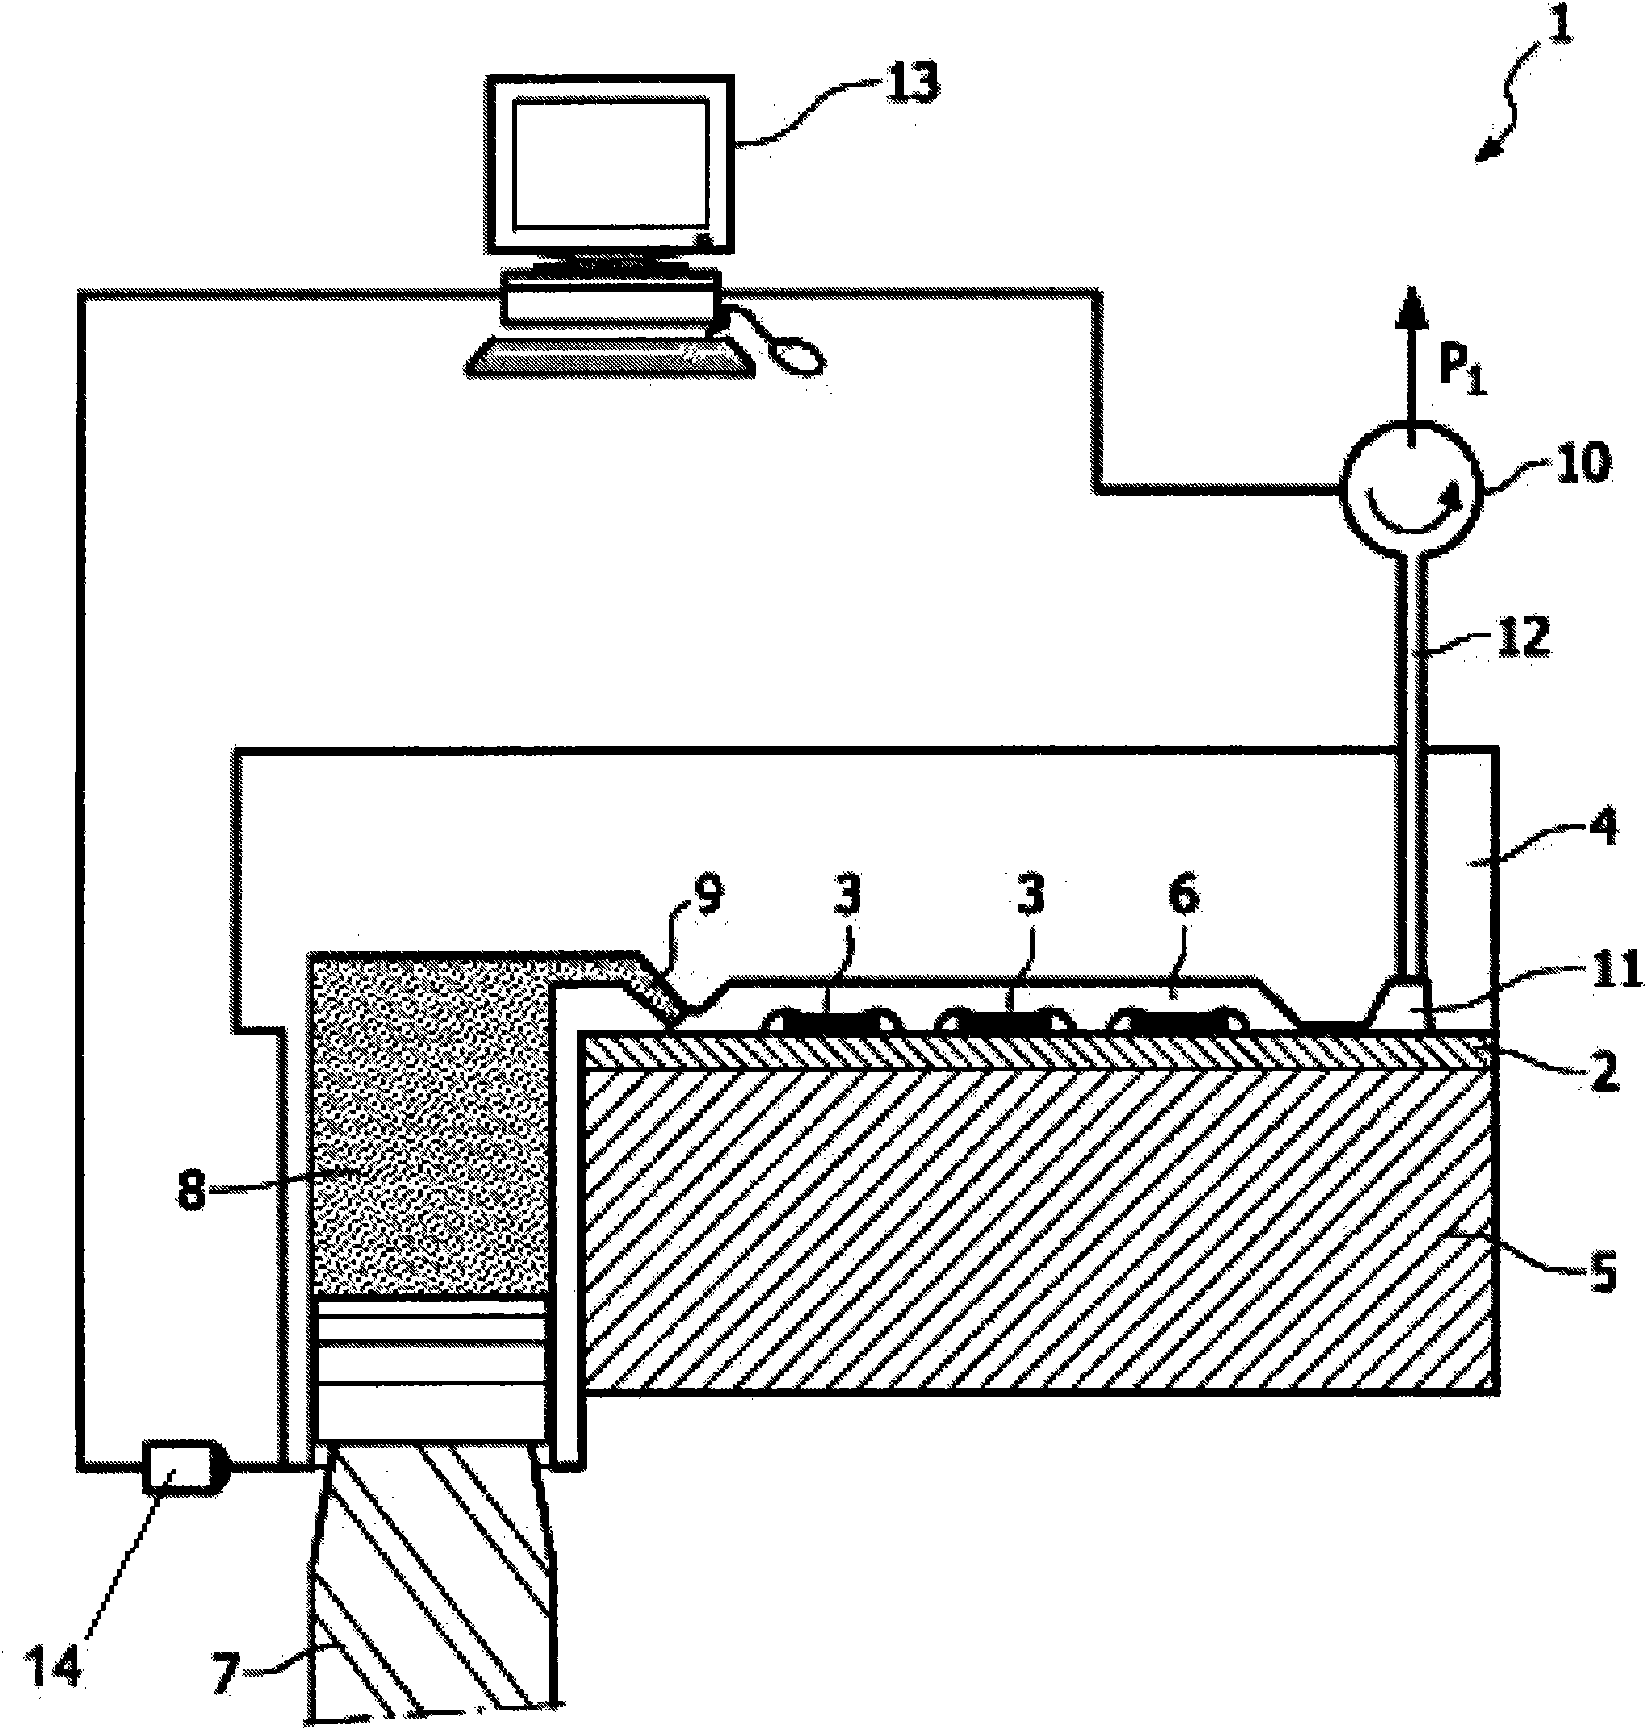 Method and device for encapsulating electronic components using underpressure